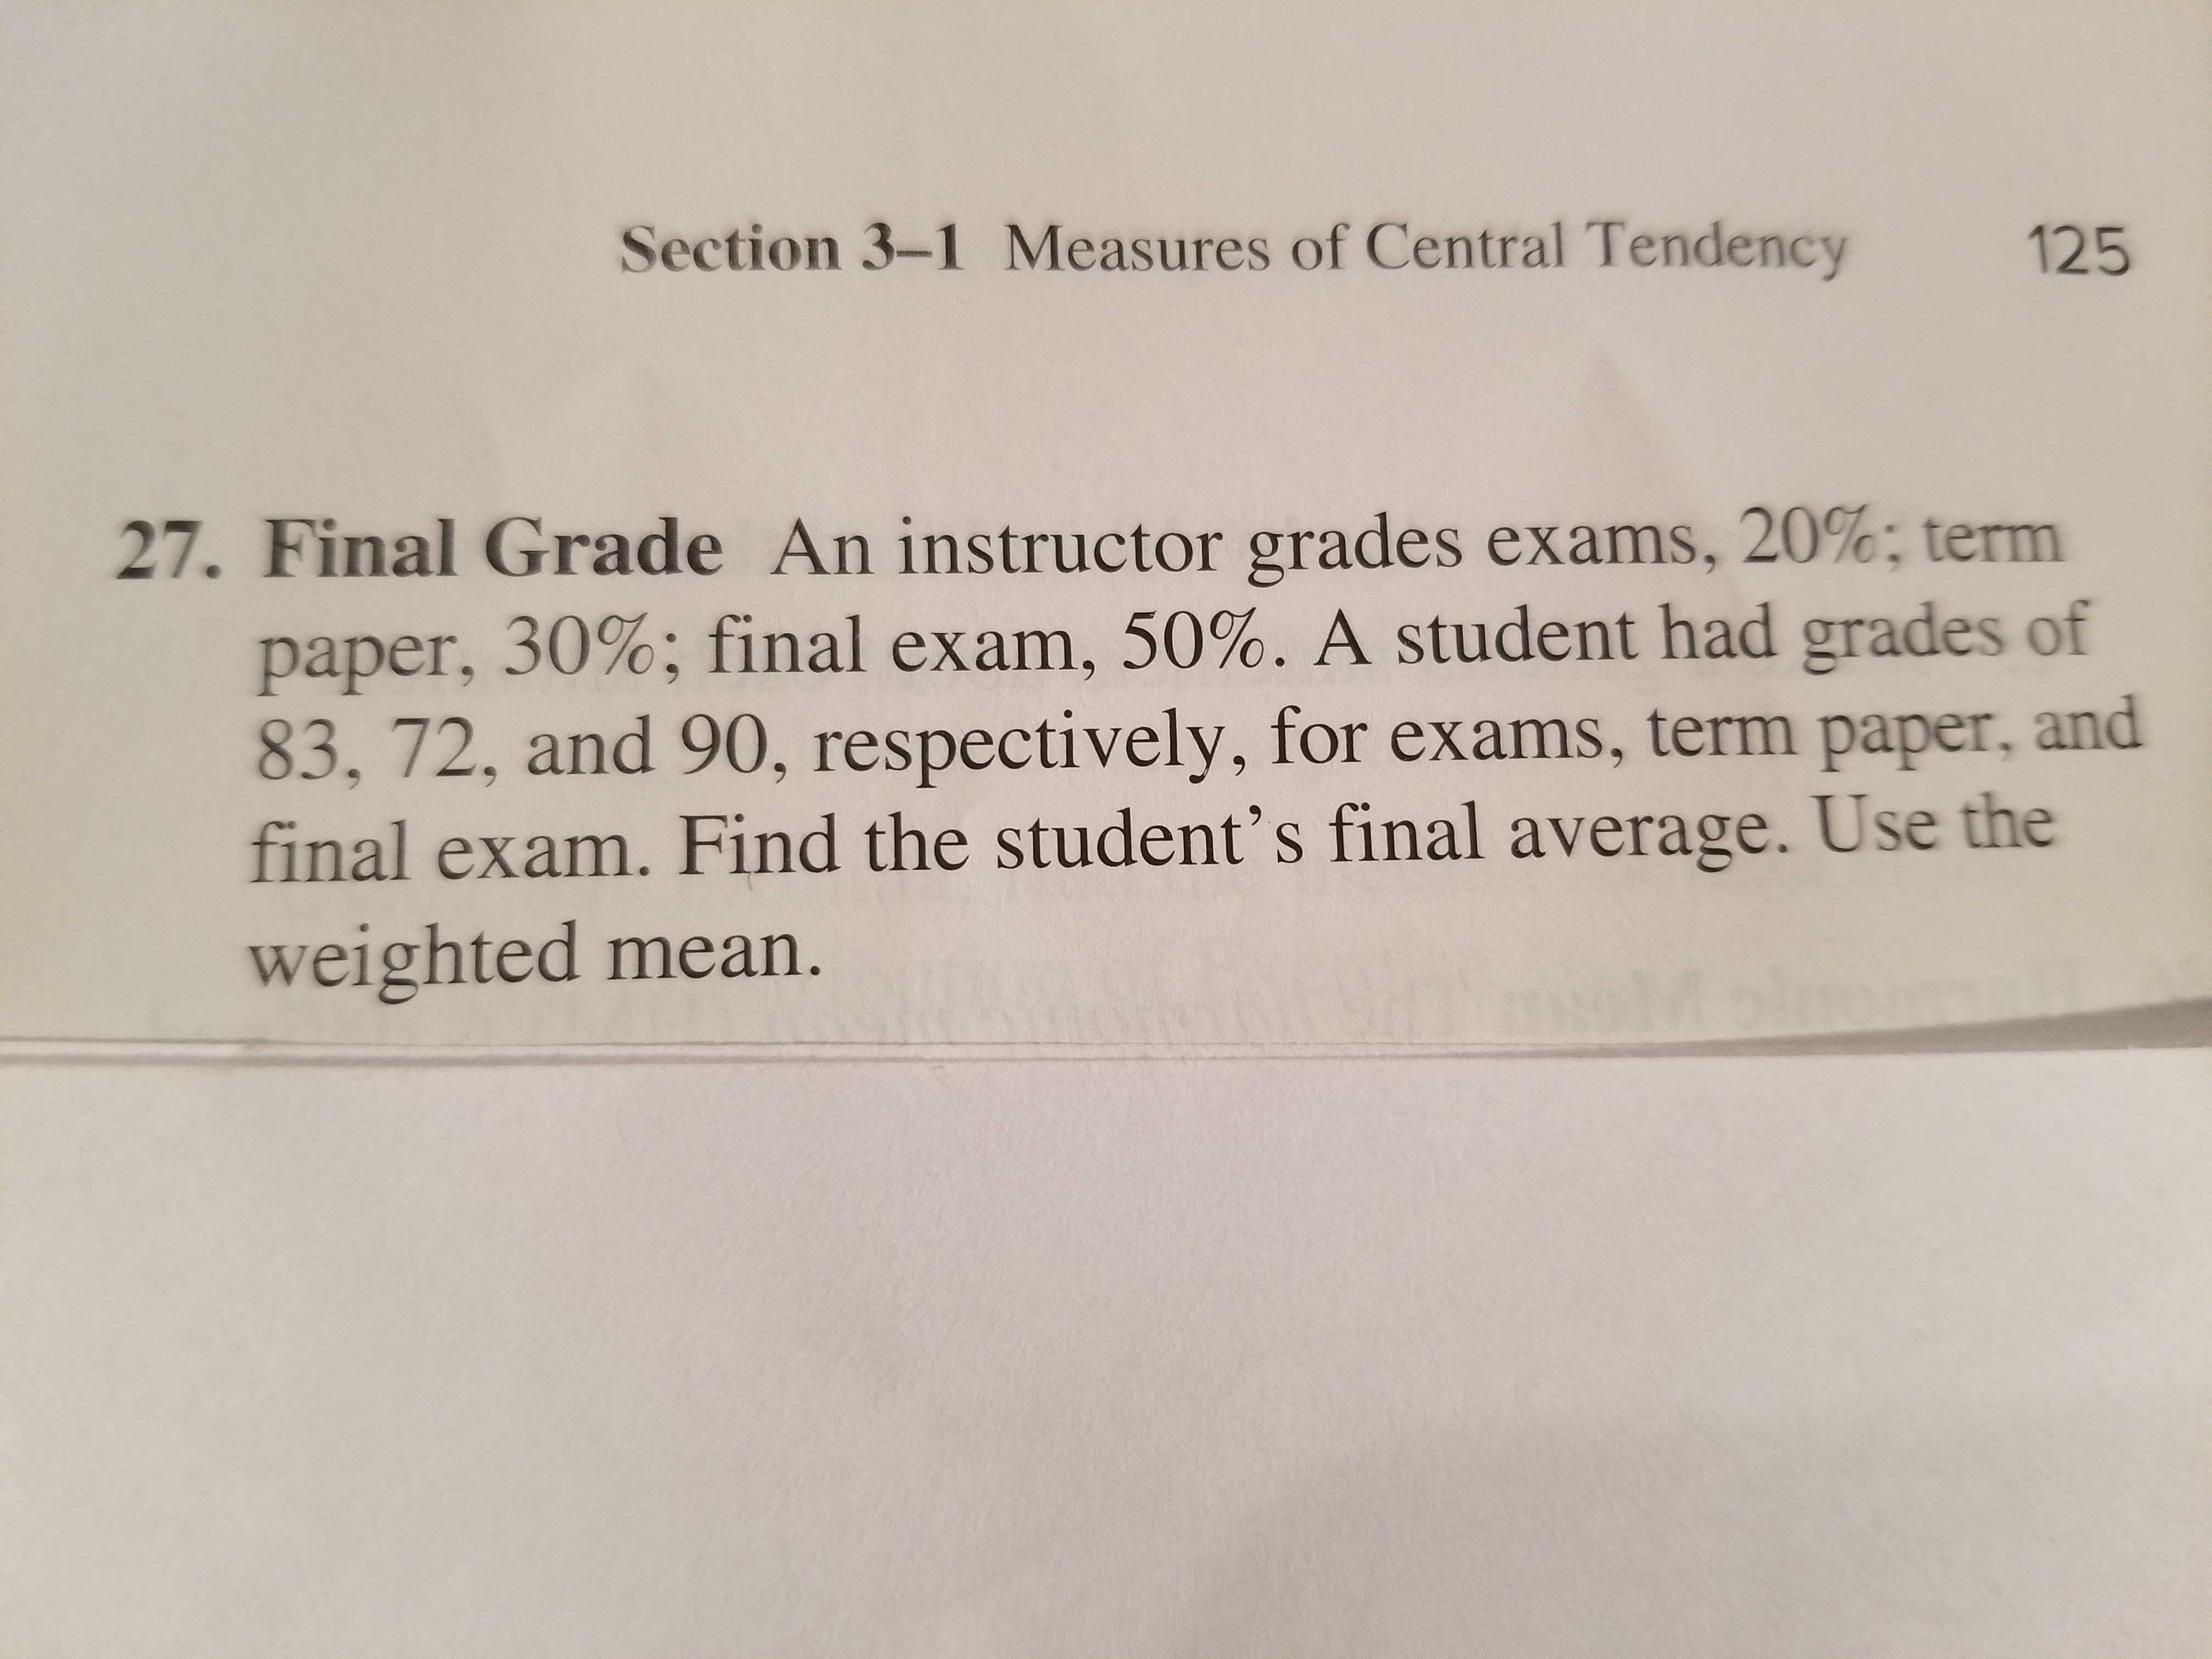 Section 3-1 Measures of Central Tendency
125
27. Final Grade An instructor grades exams, 20%; term
paper, 30%; final exam, 50%. A student had grades of
83, 72, and 90, respectively, for exams, term paper, and
final exam. Find the student's final average. Use the
weighted mean.
